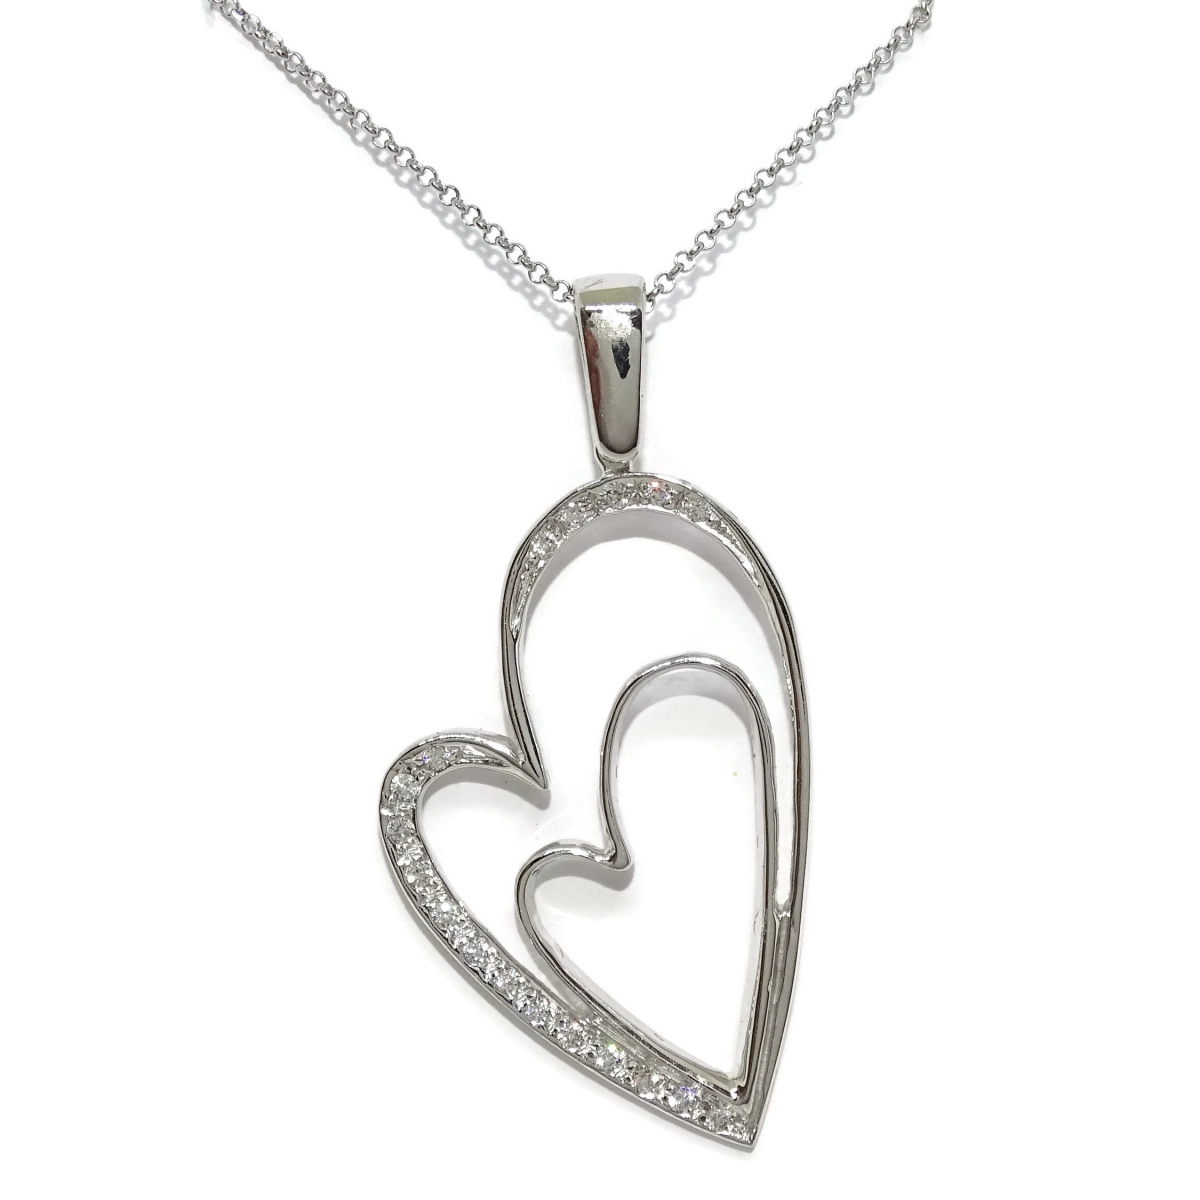 NECKLACE HEART CHARM�N OF WHITE GOLD 18K WITH ZIRCONS, LARGE 3.40 CM HIGH WITH CHAIN ROLO GOLD NEVER SAY NEVER